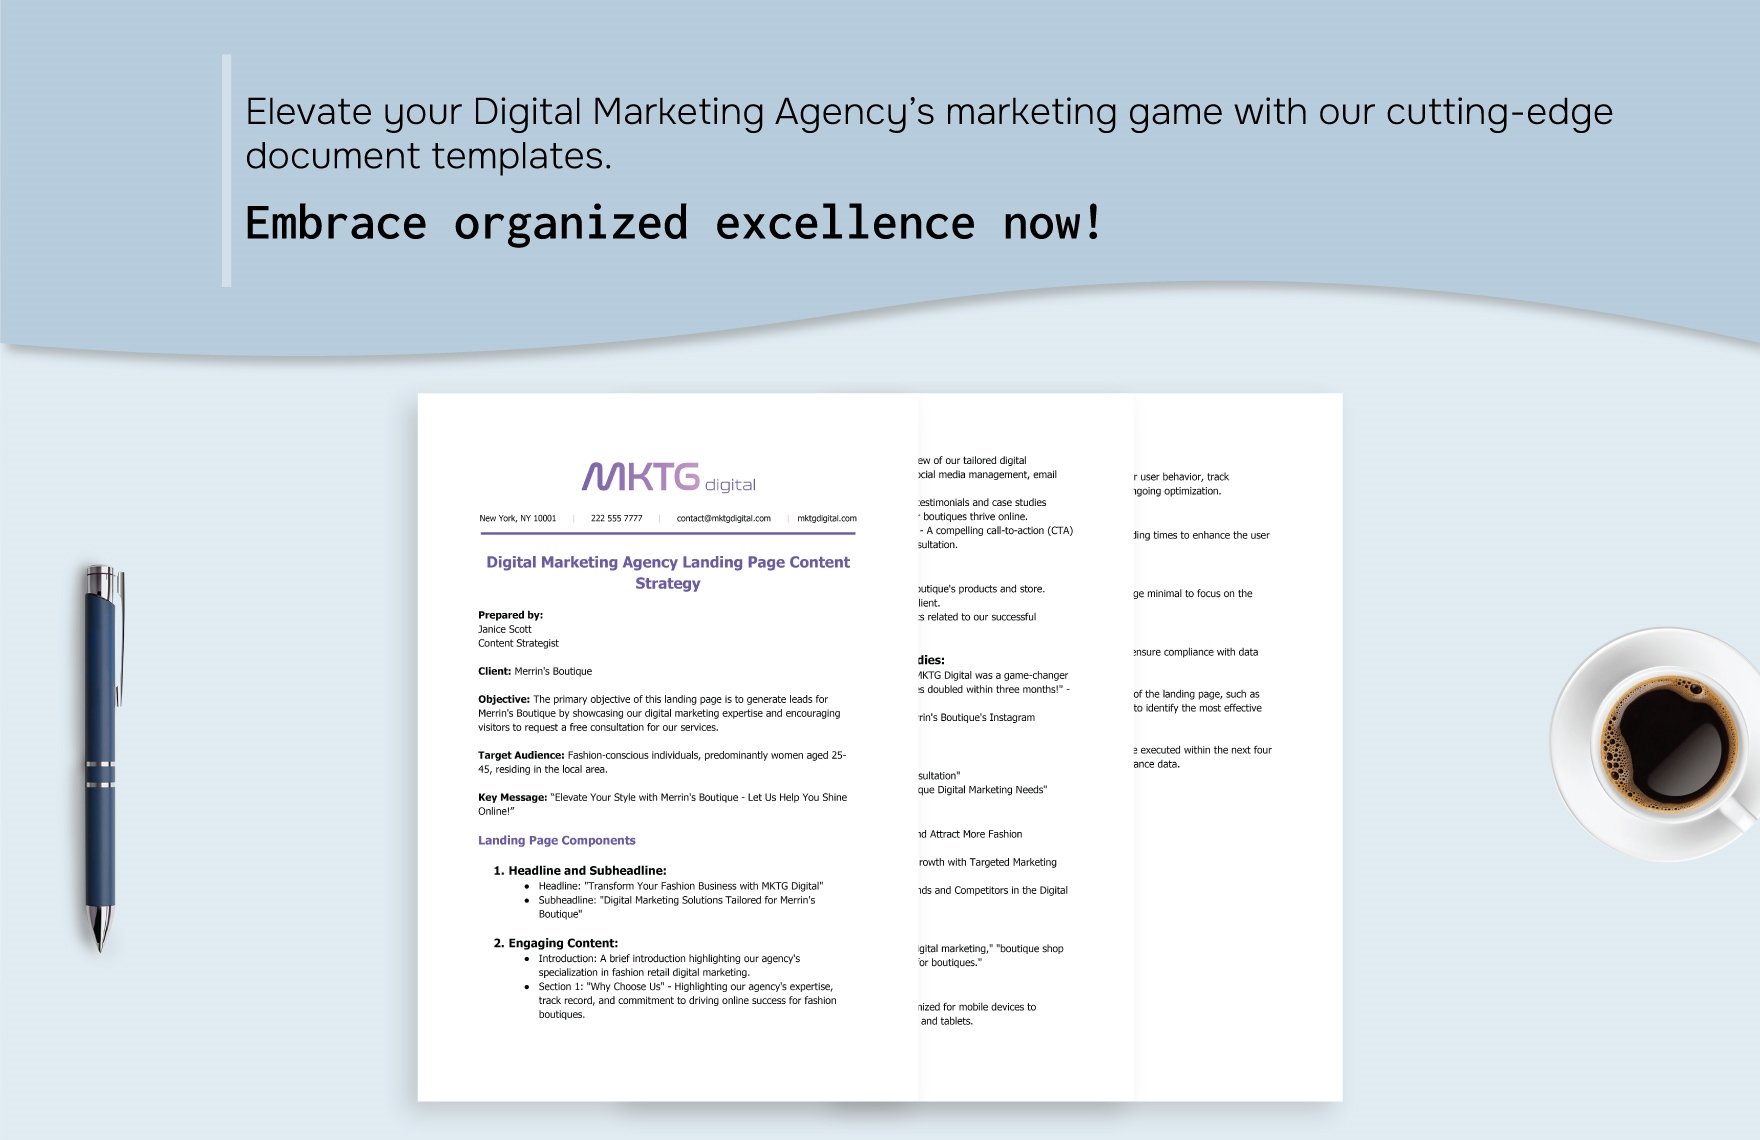 Digital Marketing Agency Landing Page Content Strategy Template